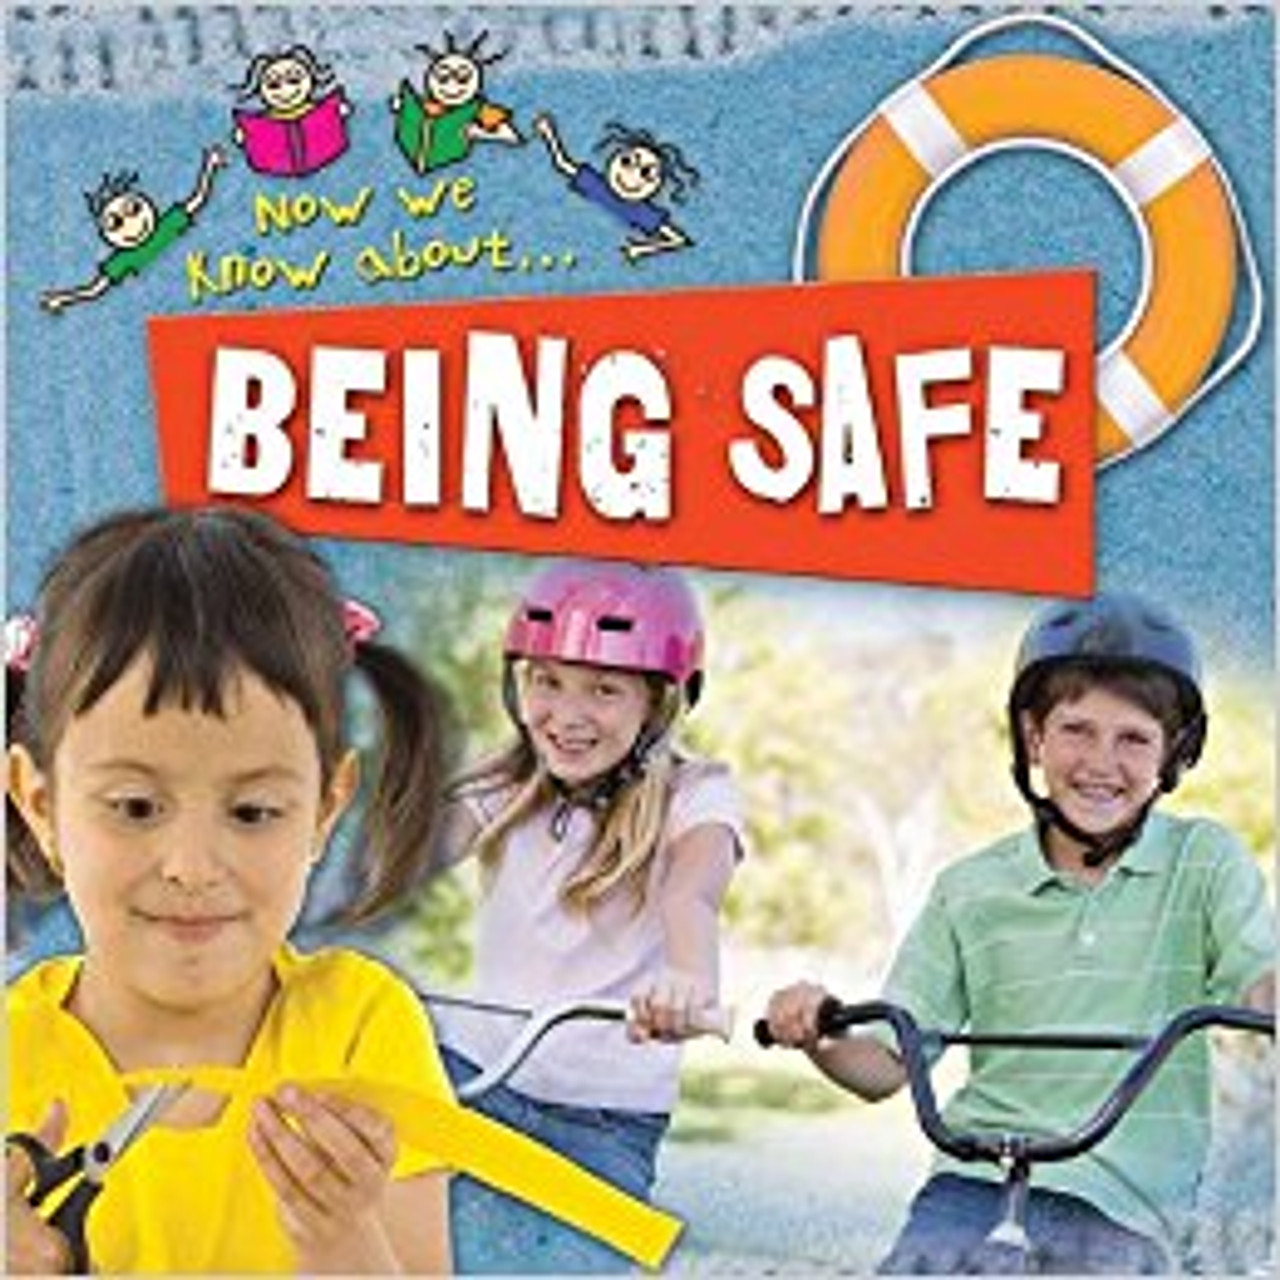 Being Safe (Paperback) by Jinny Johnson